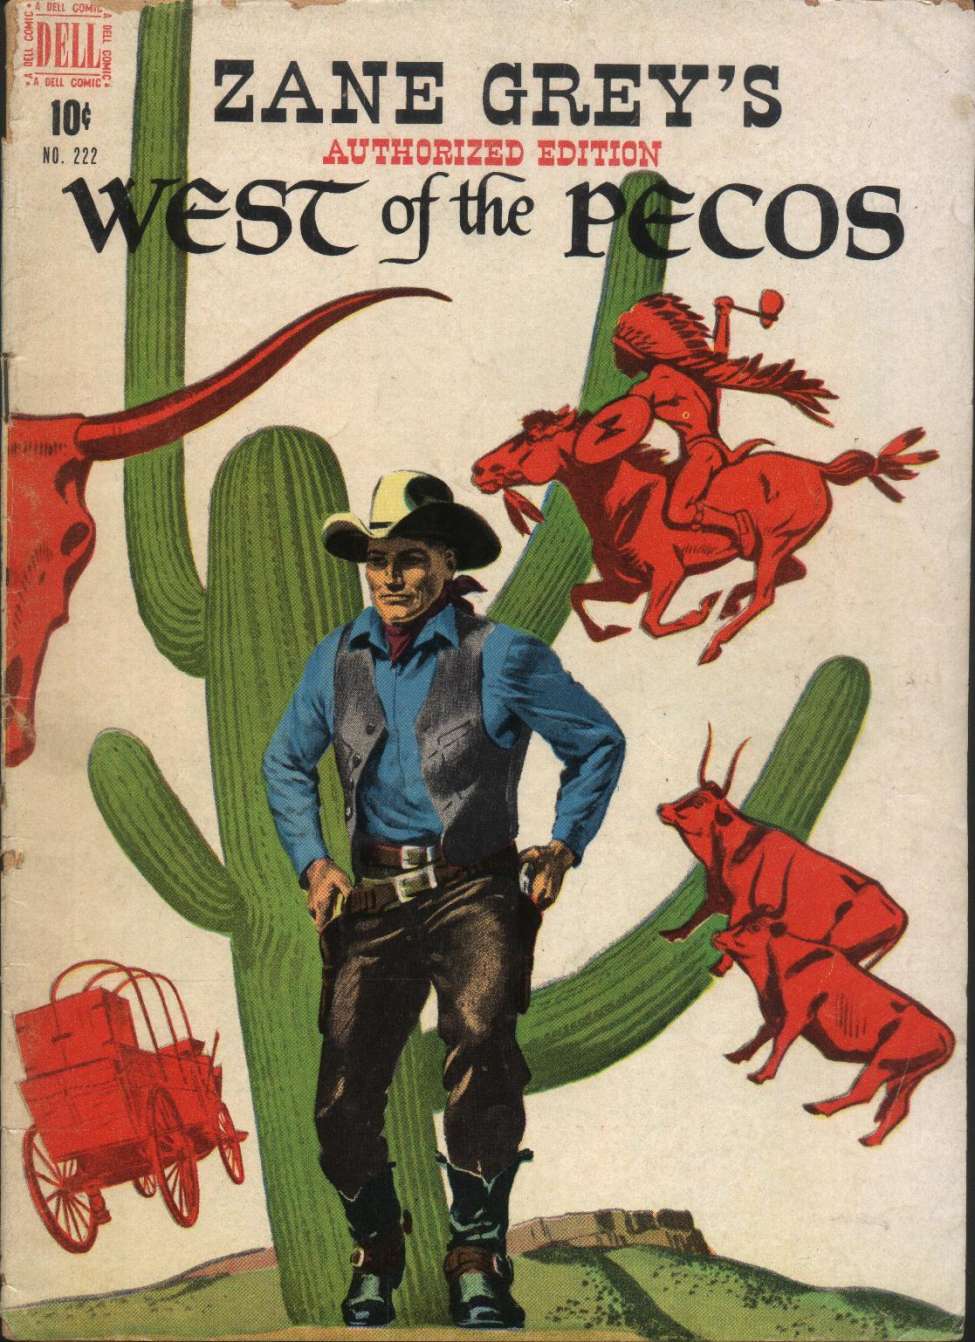 Book Cover For 0222 - Zane Grey's West of the Pecos